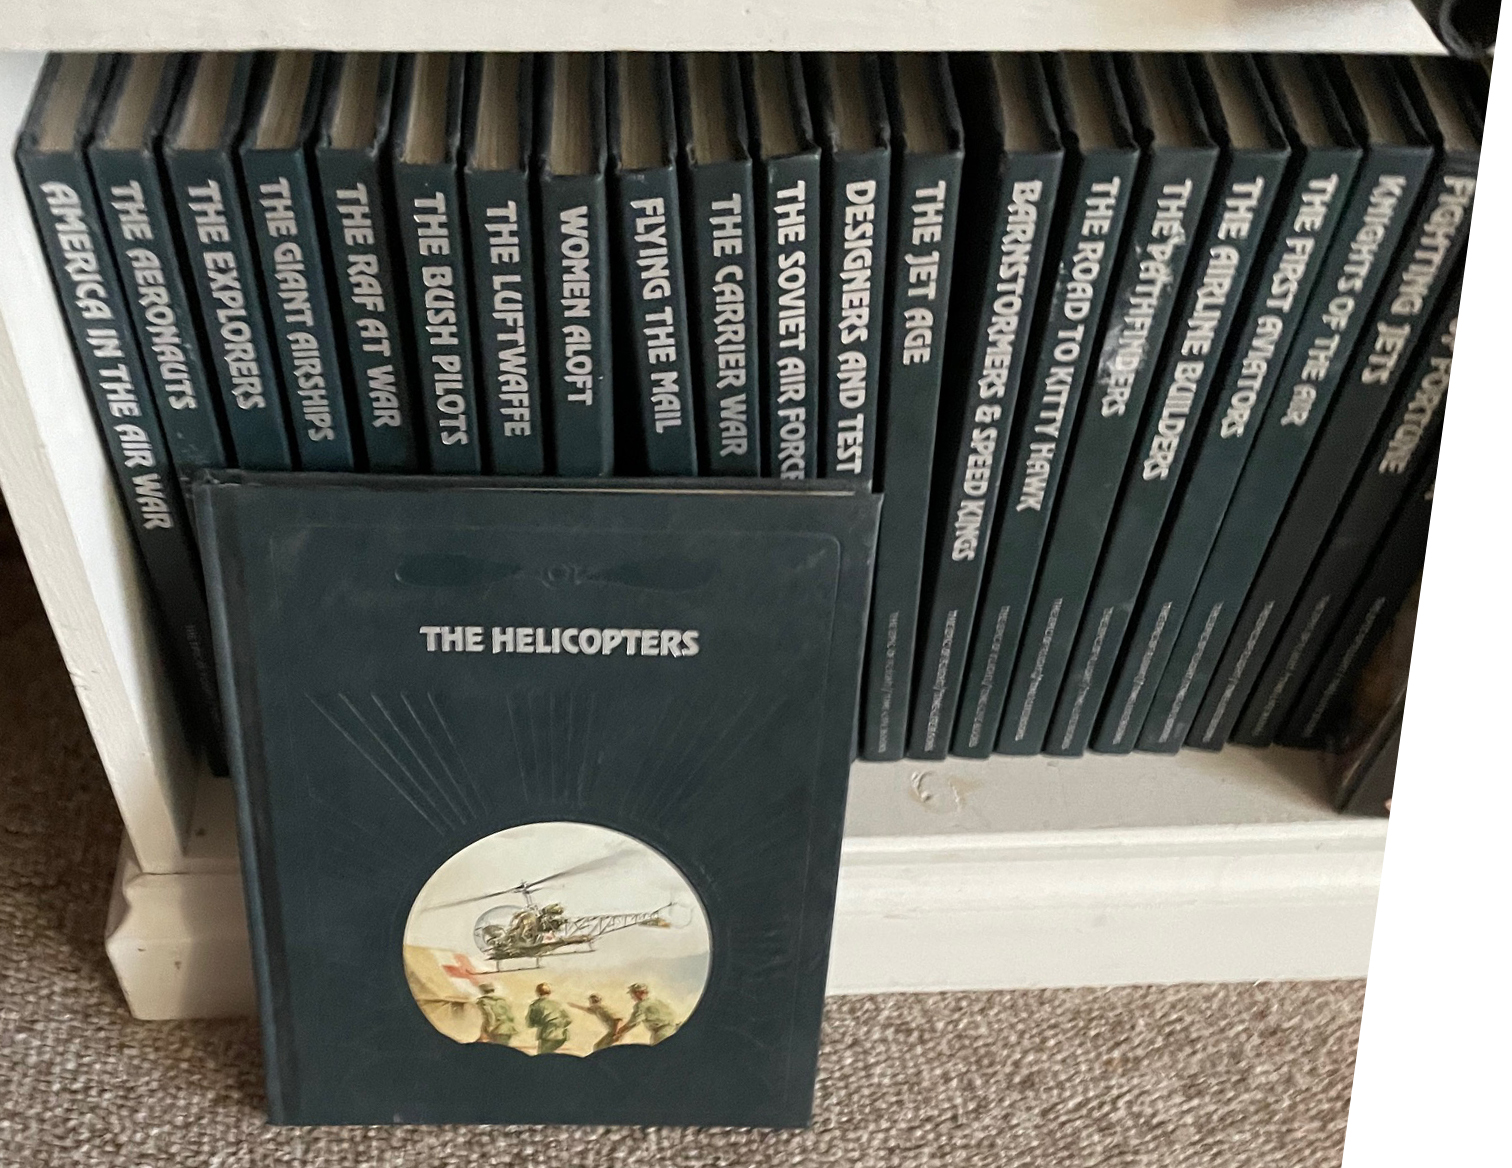 FREE – The Epic Of Flight Time Life Books Complete Set Volumes 1-23 Aviation History